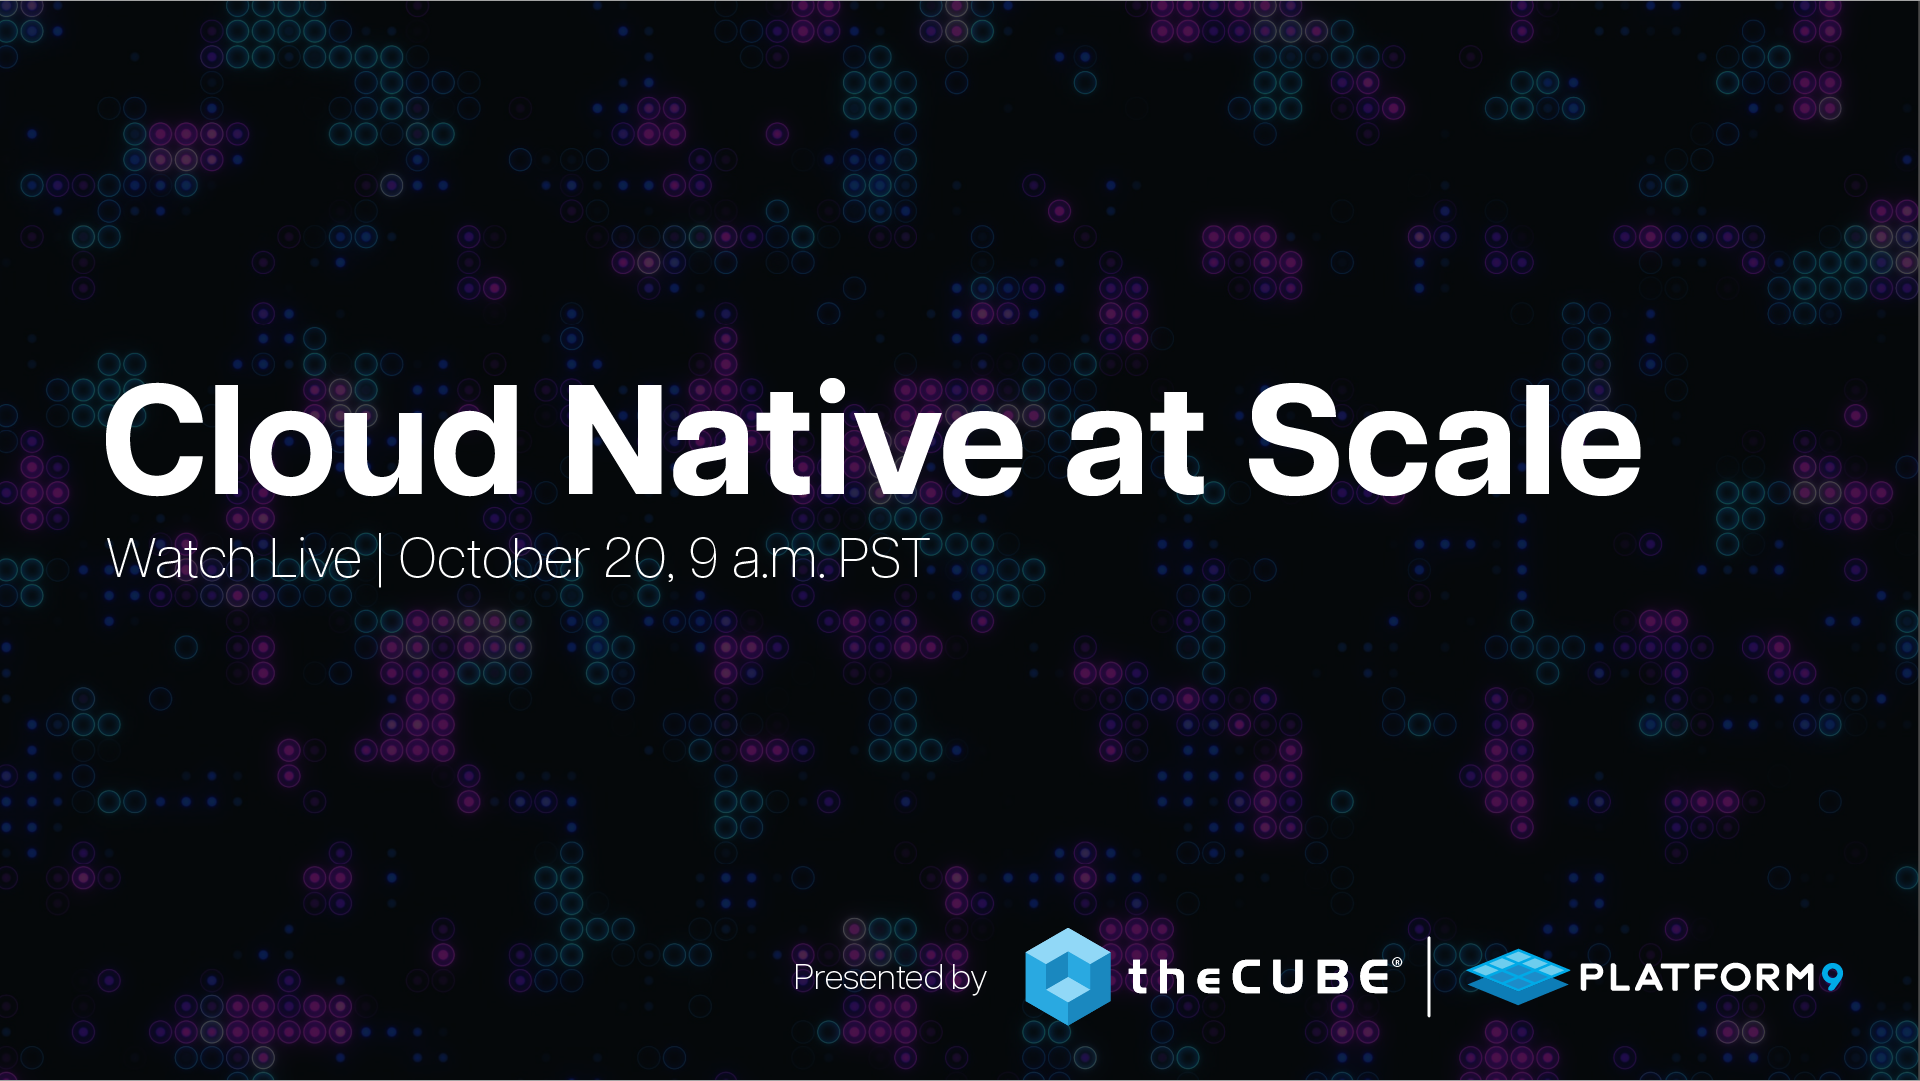 What to expect during the ‘Cloud Native at Scale’ event: Join theCUBE Oct. 20